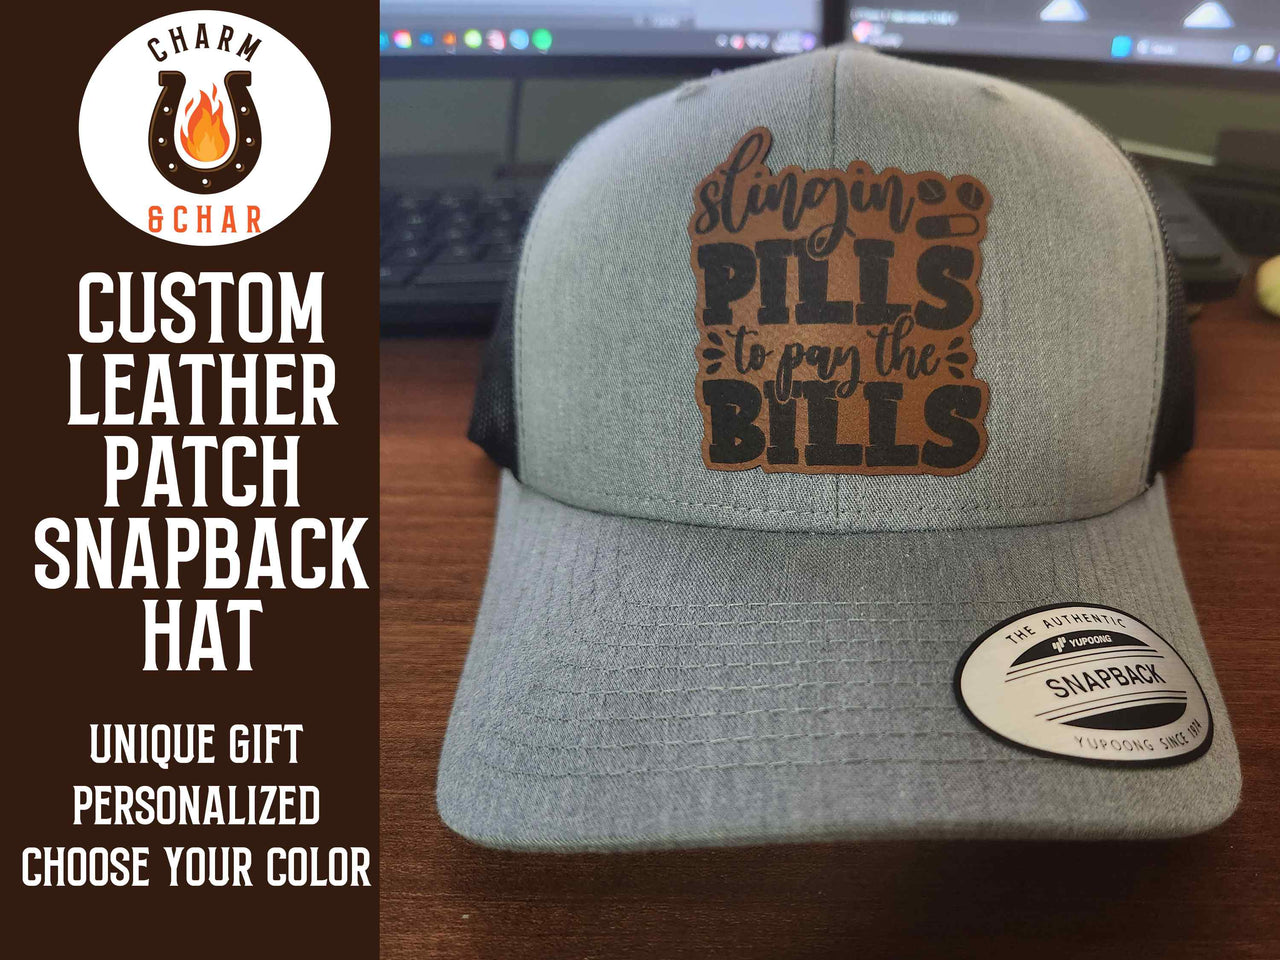 Slinging Pills to Pay the Bills Leather Patch Trucker Hat for Pharmacist